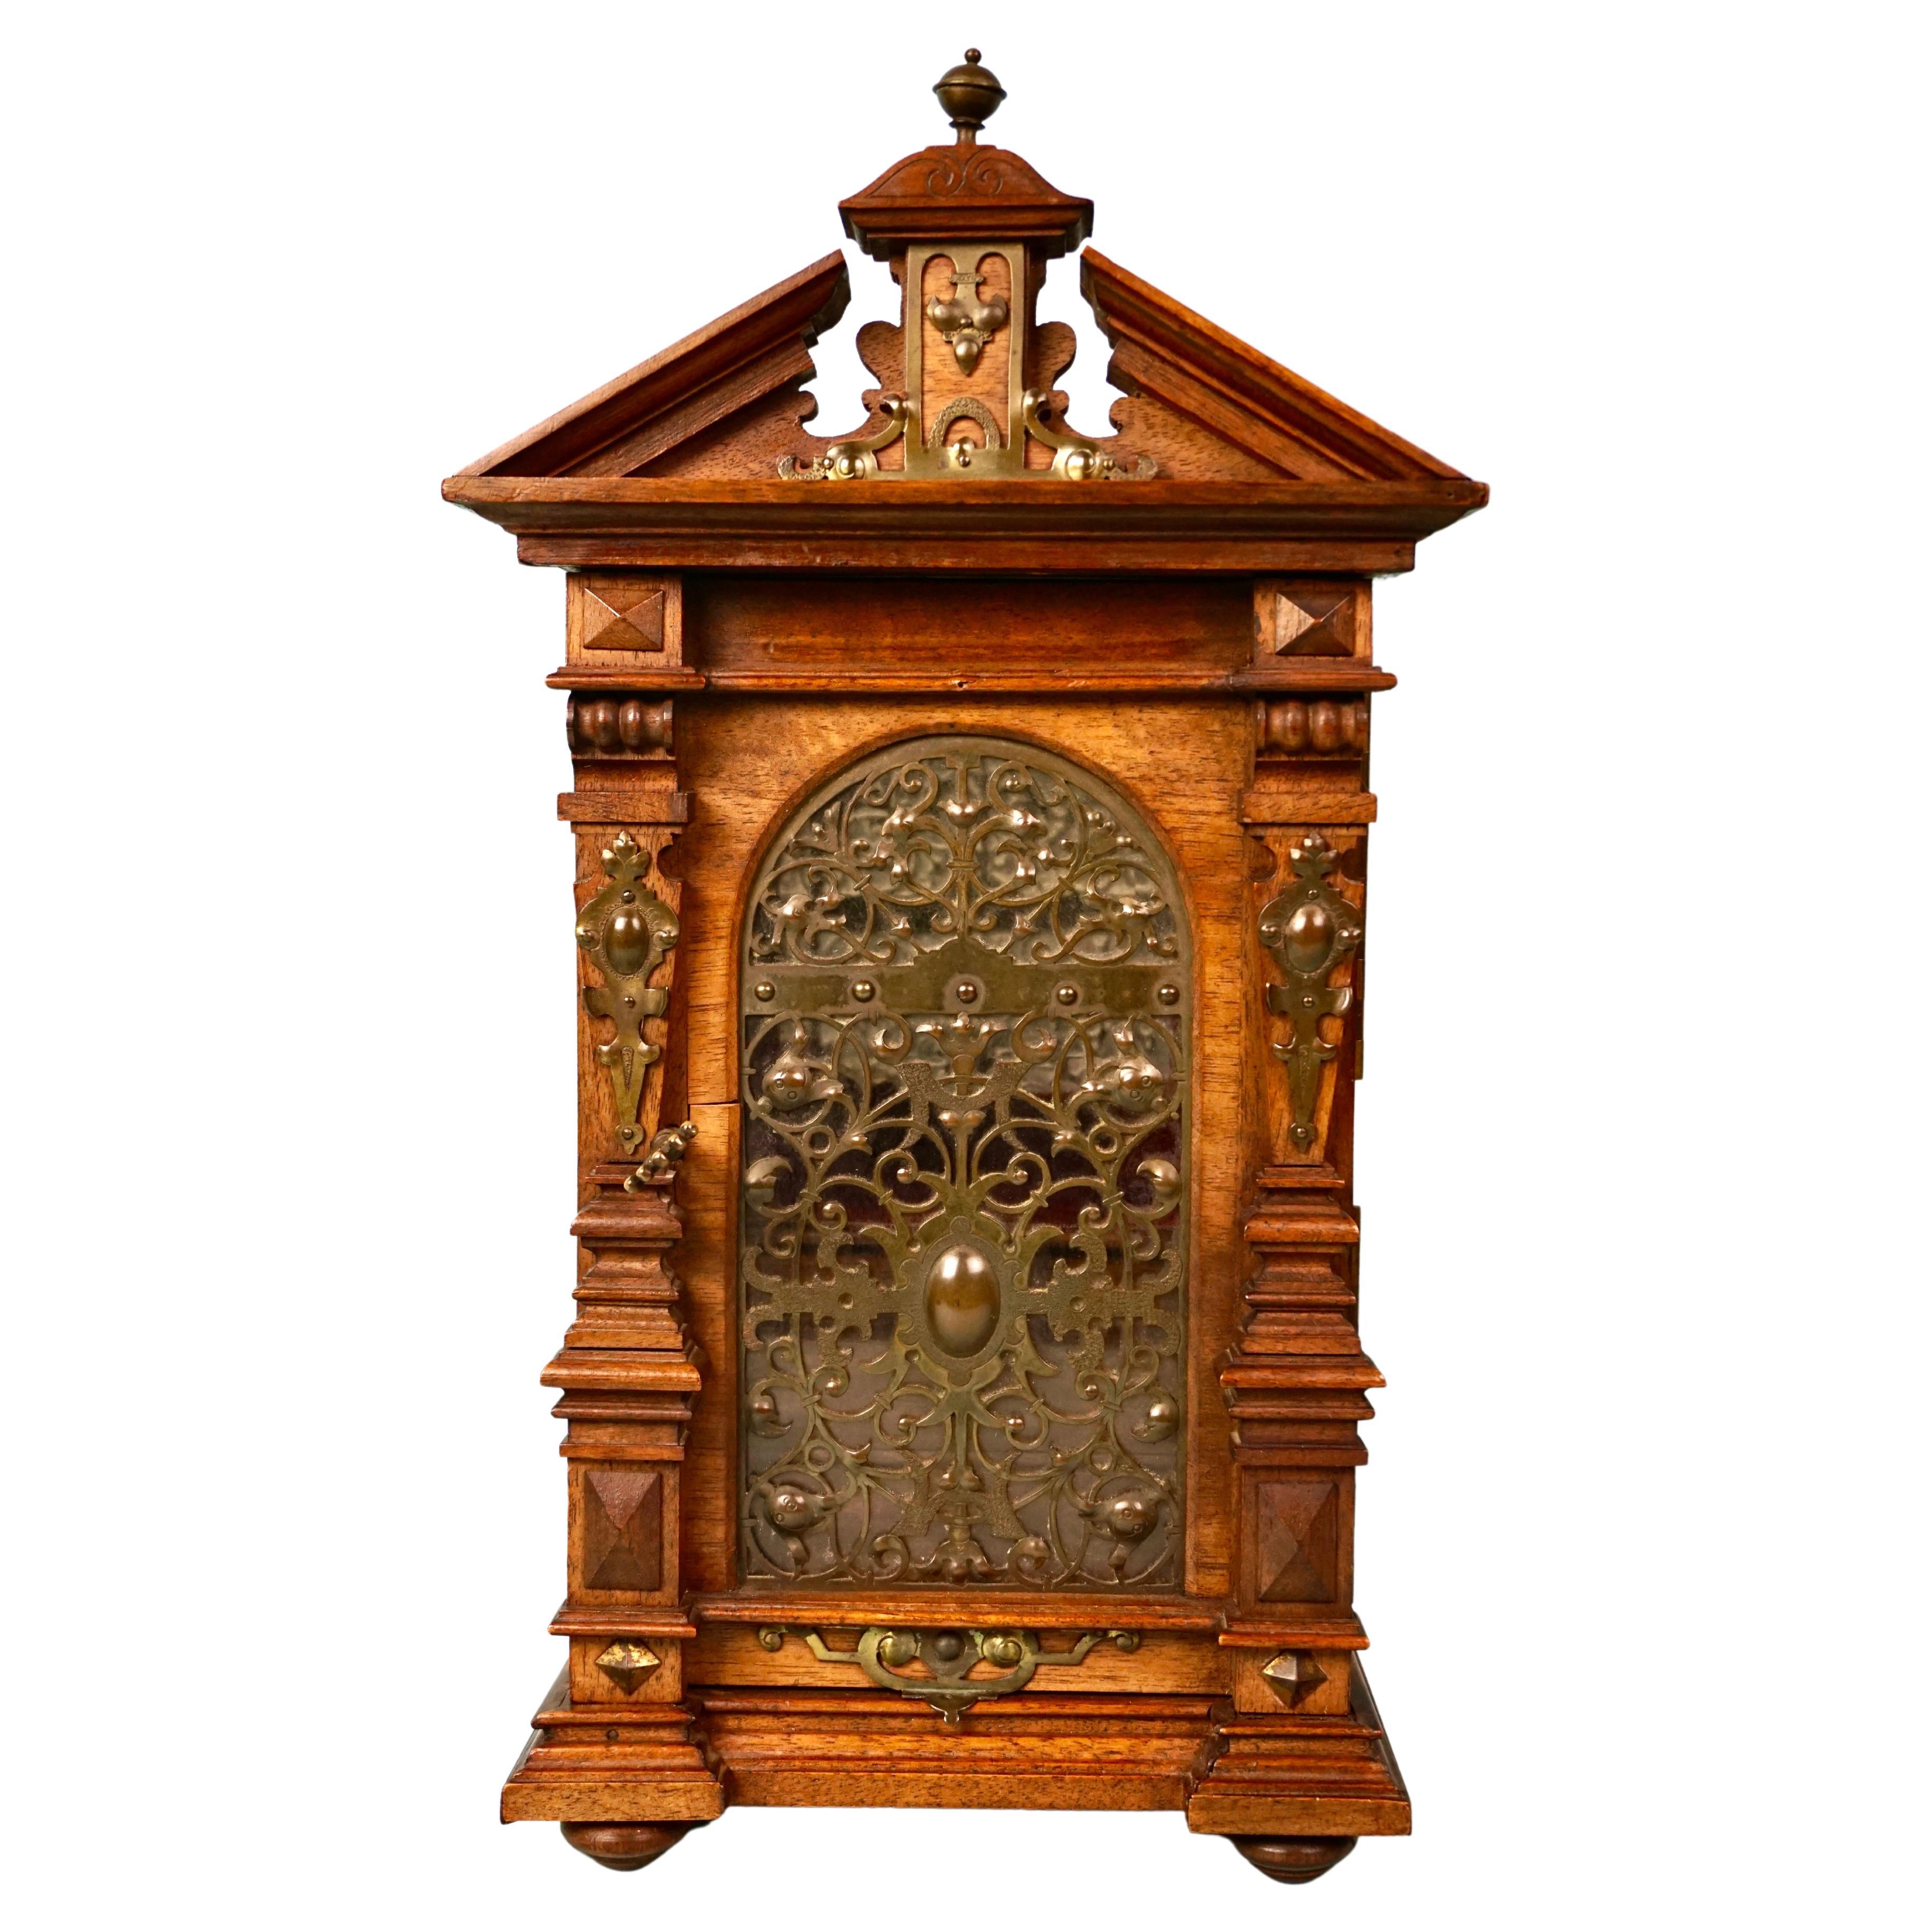 A very well-detailed figured walnut table cabinet in the neoclassical taste with an elaborate metal filigree door opening to reveal a beveled mirror above 2 small drawers, surmounted by a broken pediment cornice centered by a finial. The piece rests